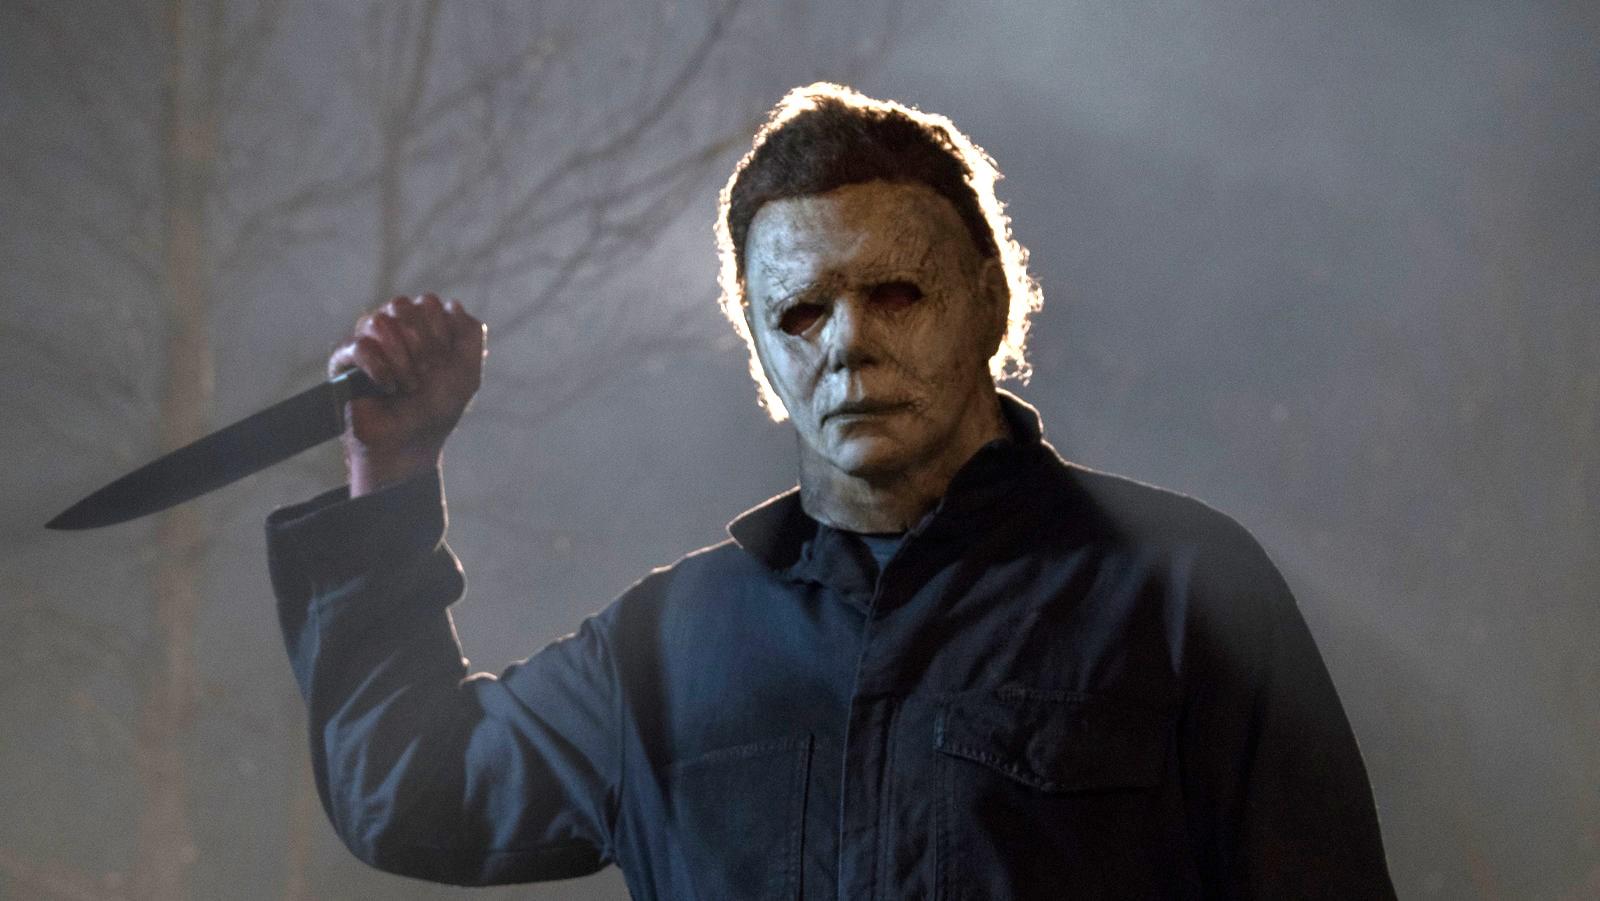 Michael Myers in Halloween Ends, standing in the dark and holding a knife